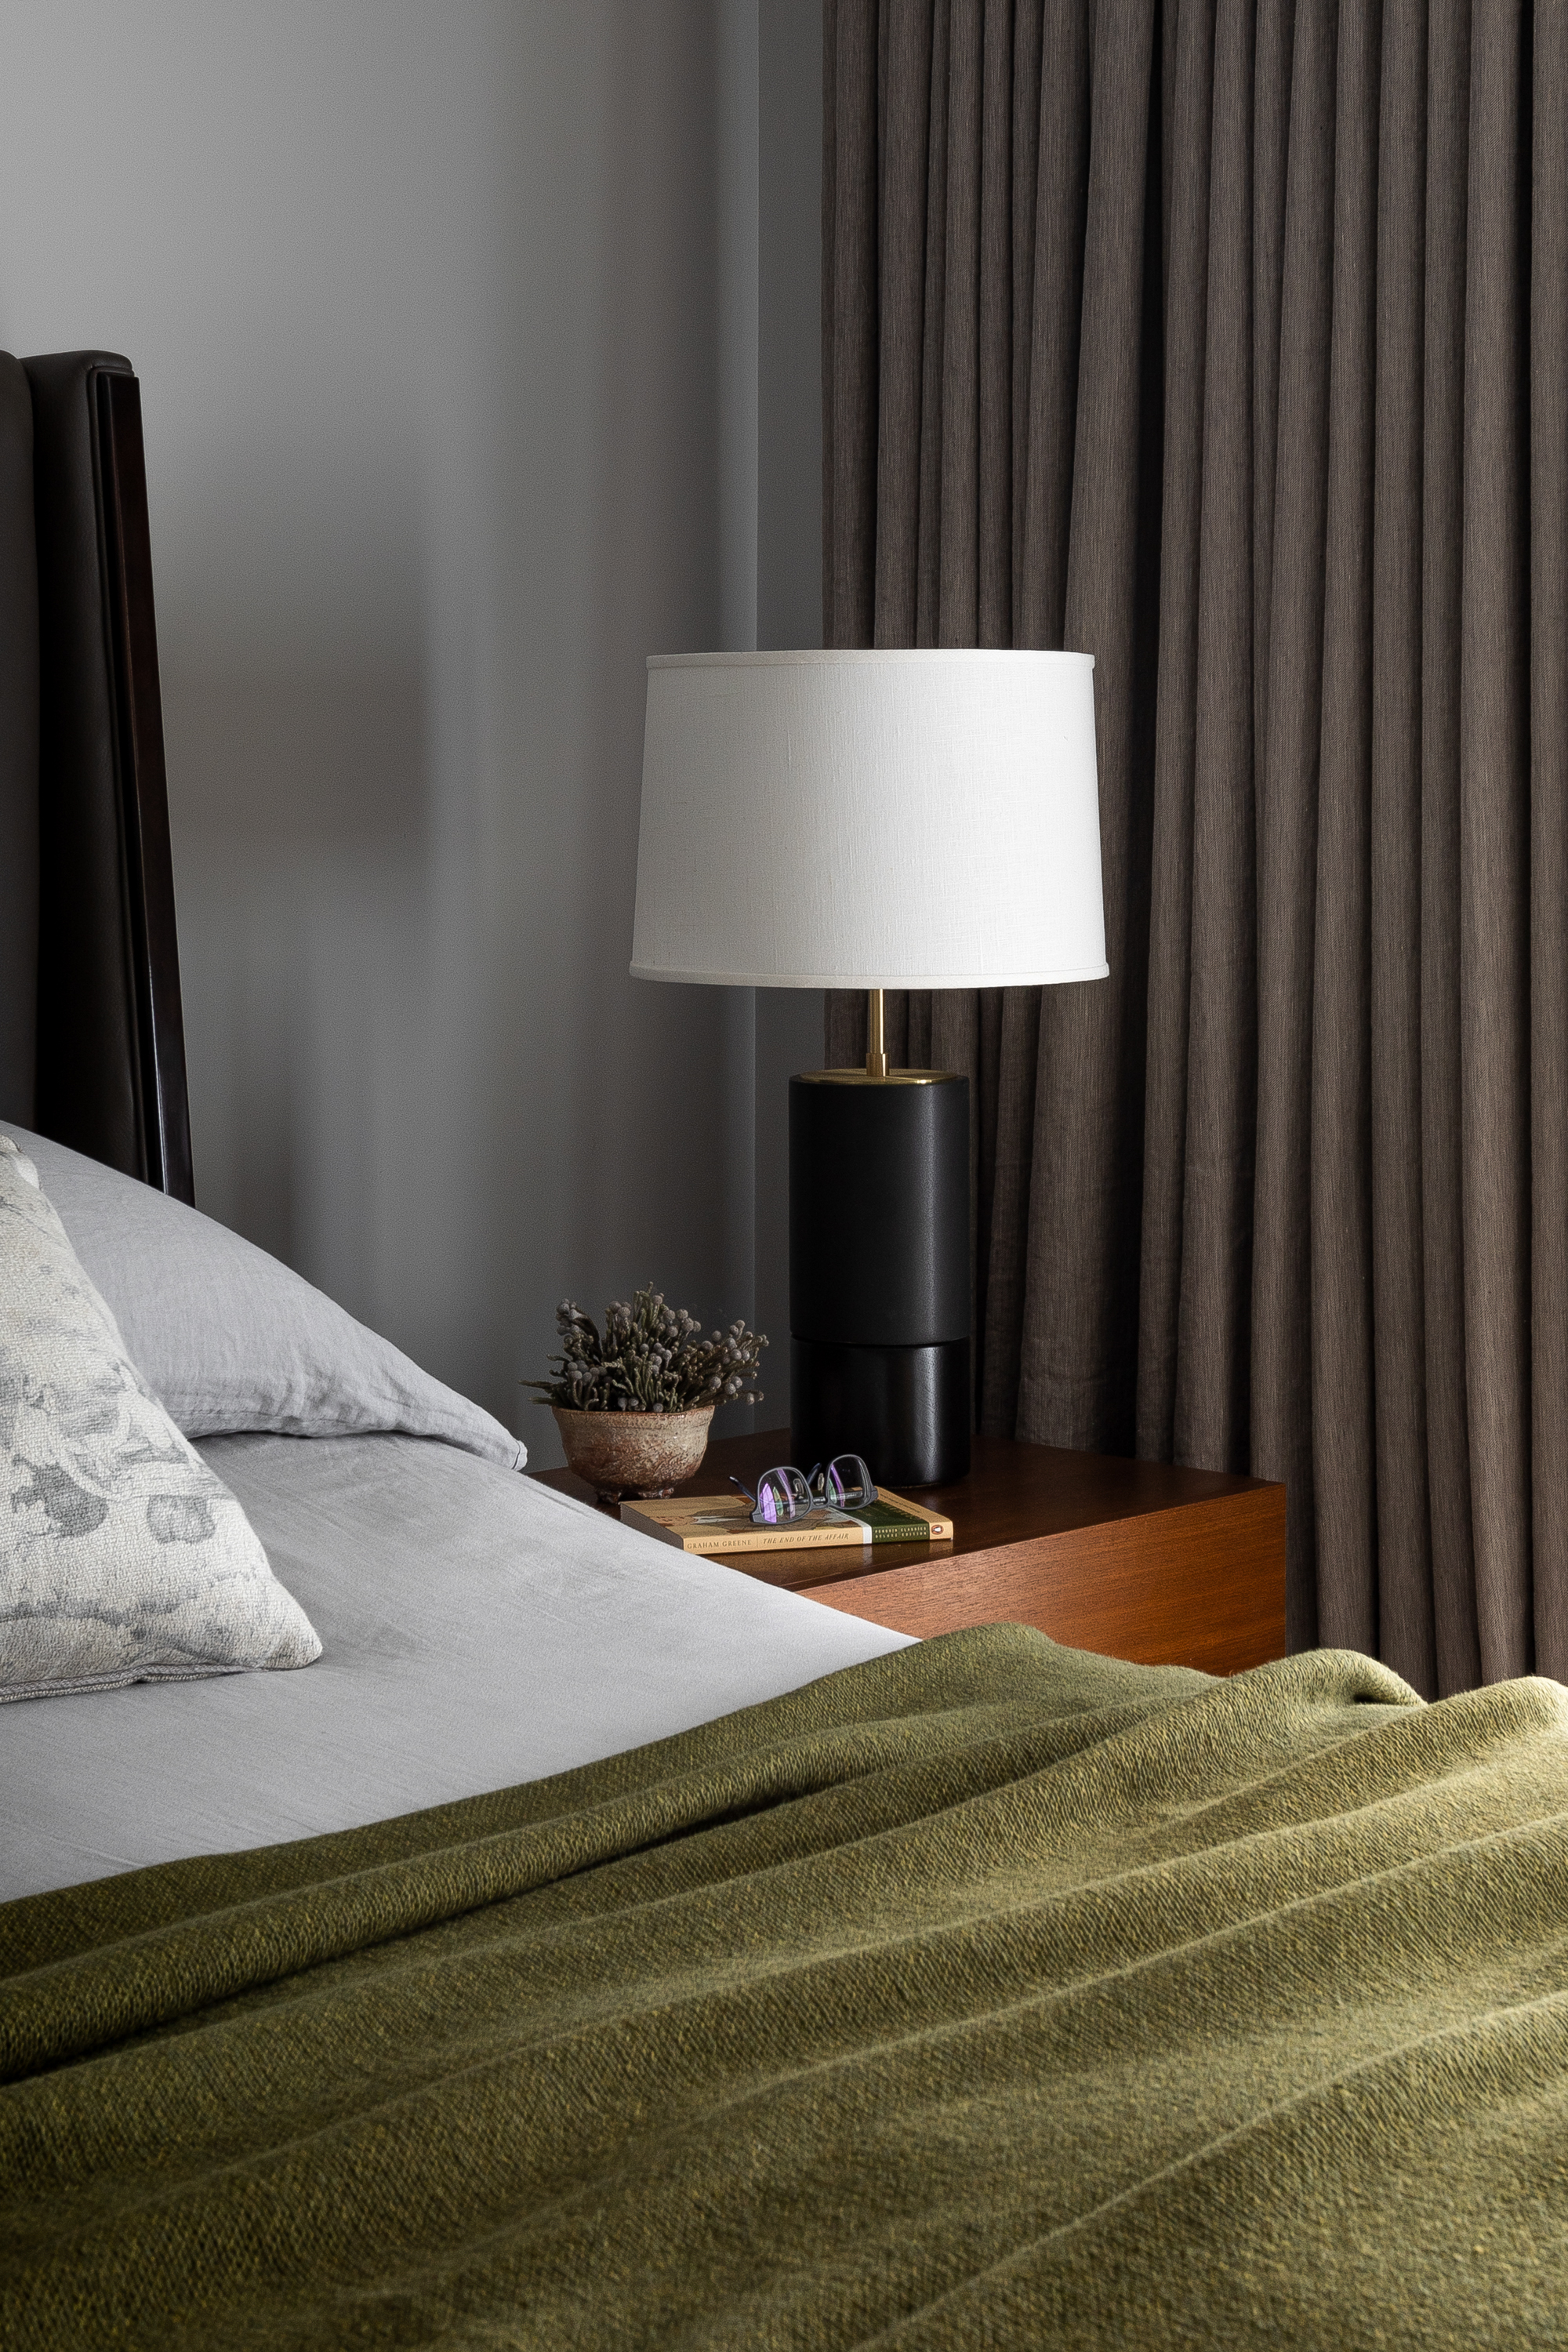 Close-up of the nightstand featuring a modern matte black ceramic lamp with a brass finish.